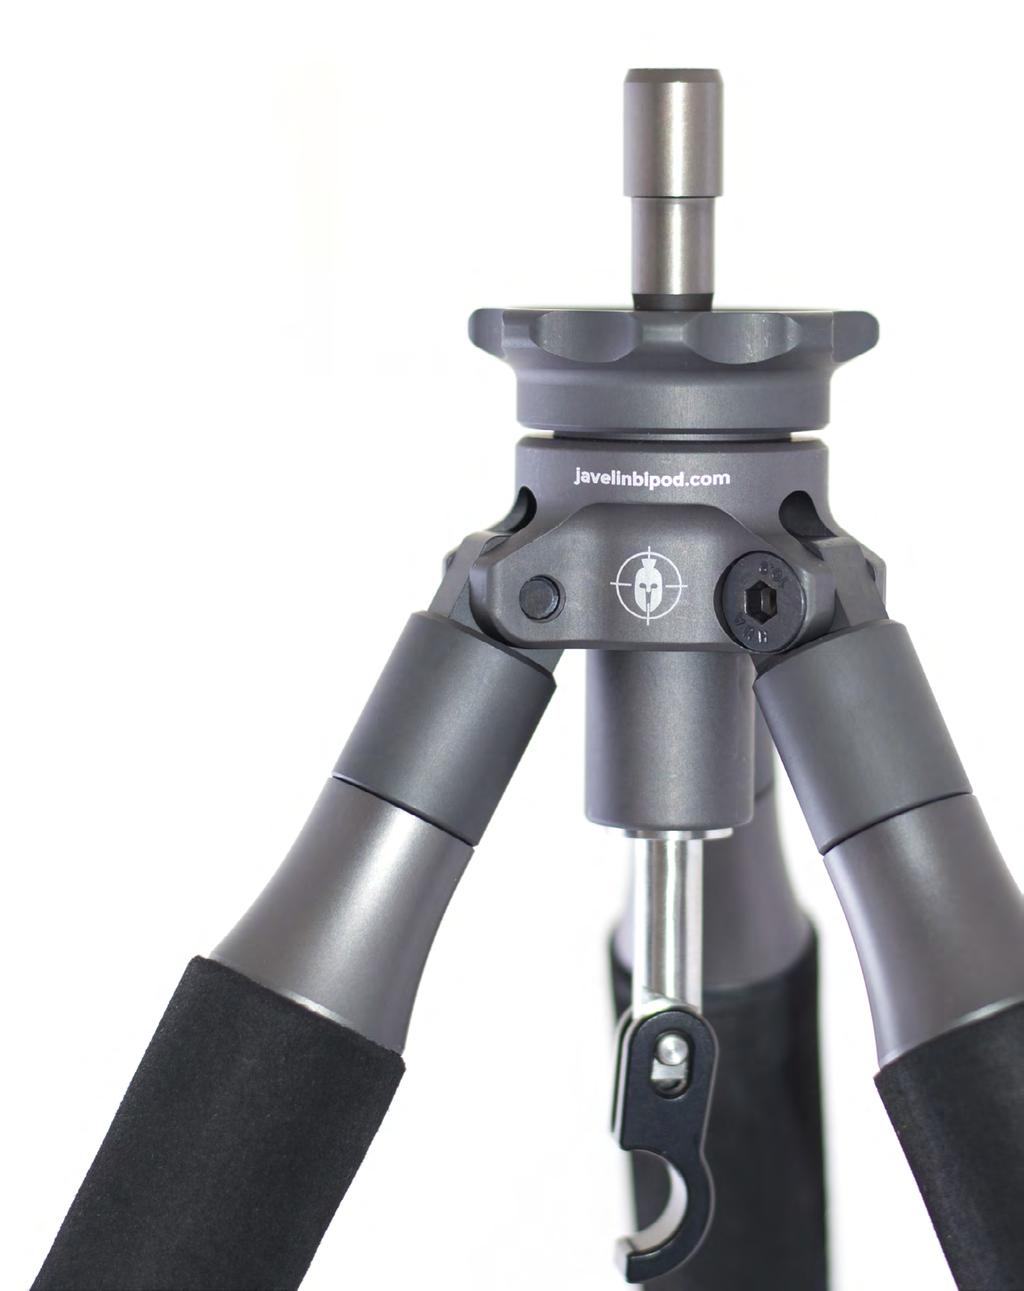 10 11 1 The Sentinel is a system, calling it a tripod completely understates its versatility as a complete shooting system for the passionate hunter and outdoors person.